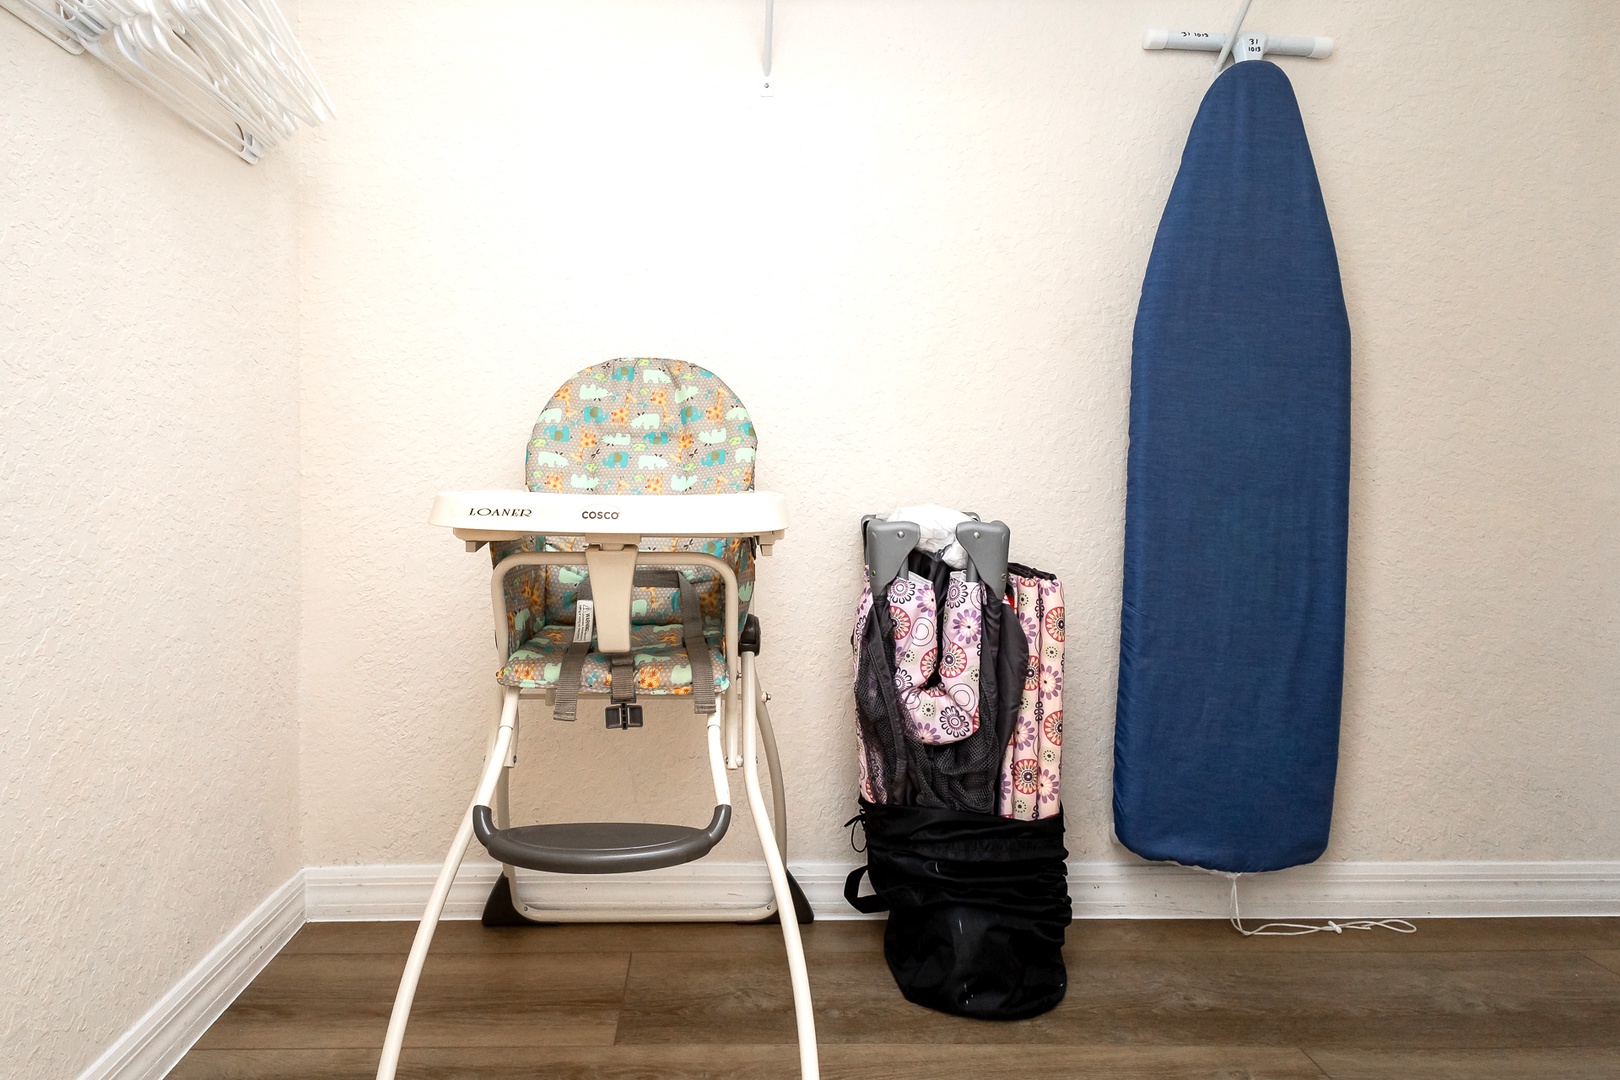 Traveling with littles? Take advantage of the available kid-friendly amenities!